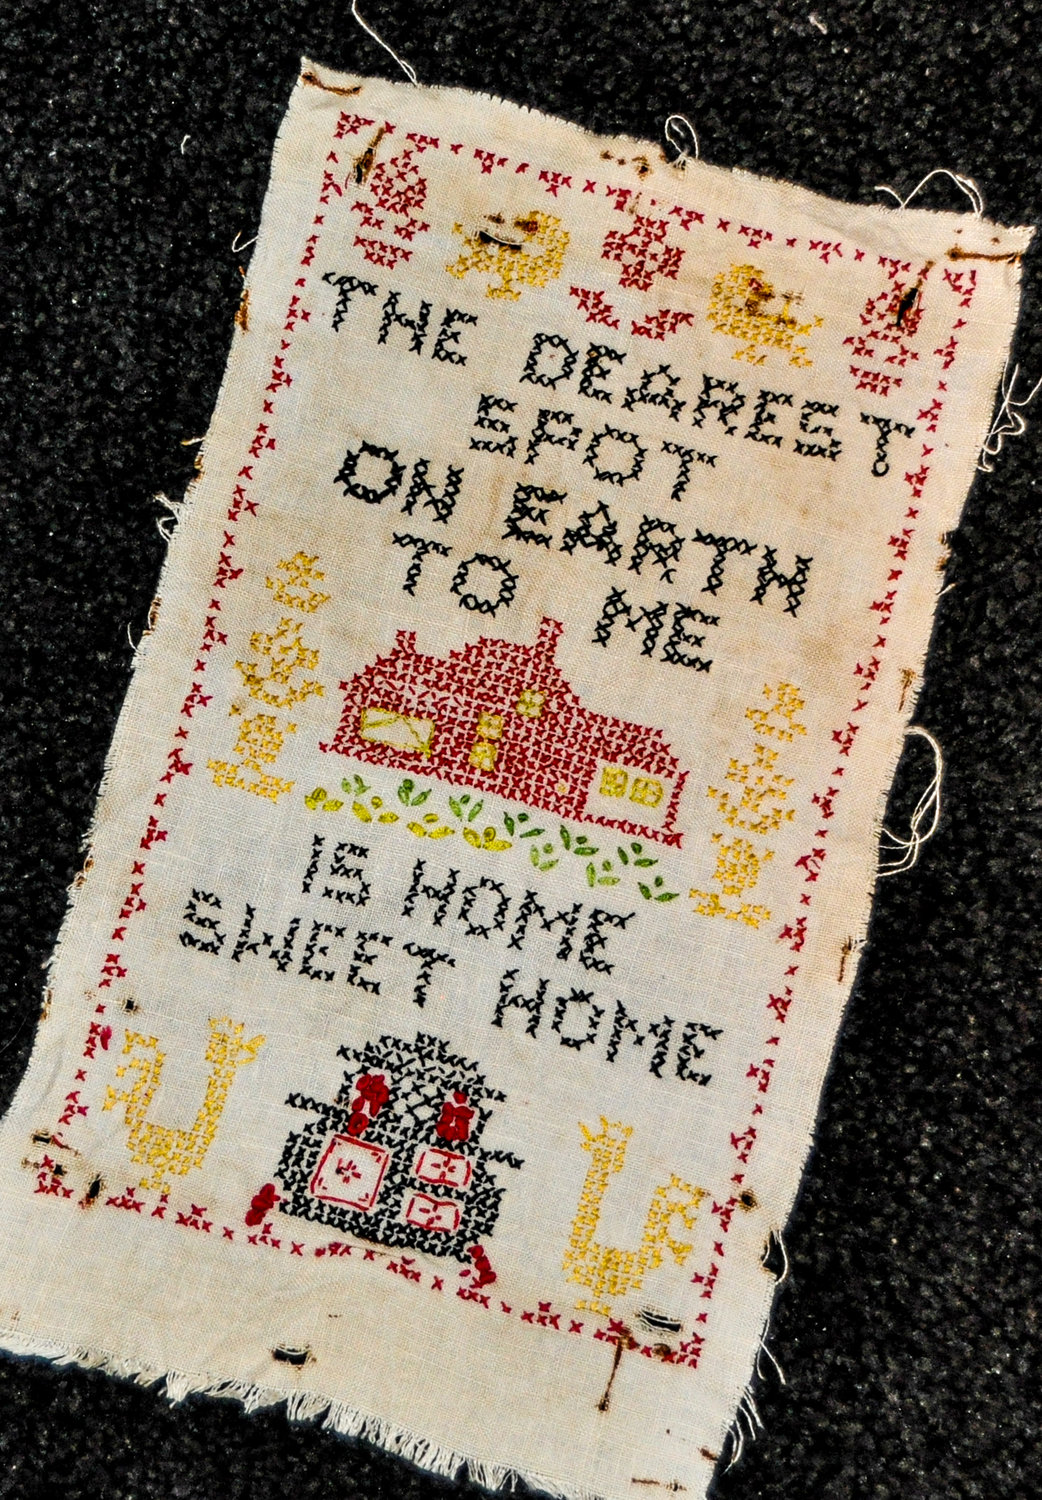 This sampler I picked up years ago in an antique store really says it all. Like many items scattered throughout my house, it's a little bit tattered but tells a story. Somebody's grandmother stitched it, I'm sure, but she doesn't actually live here, regardless of what visitors have asked in the past.